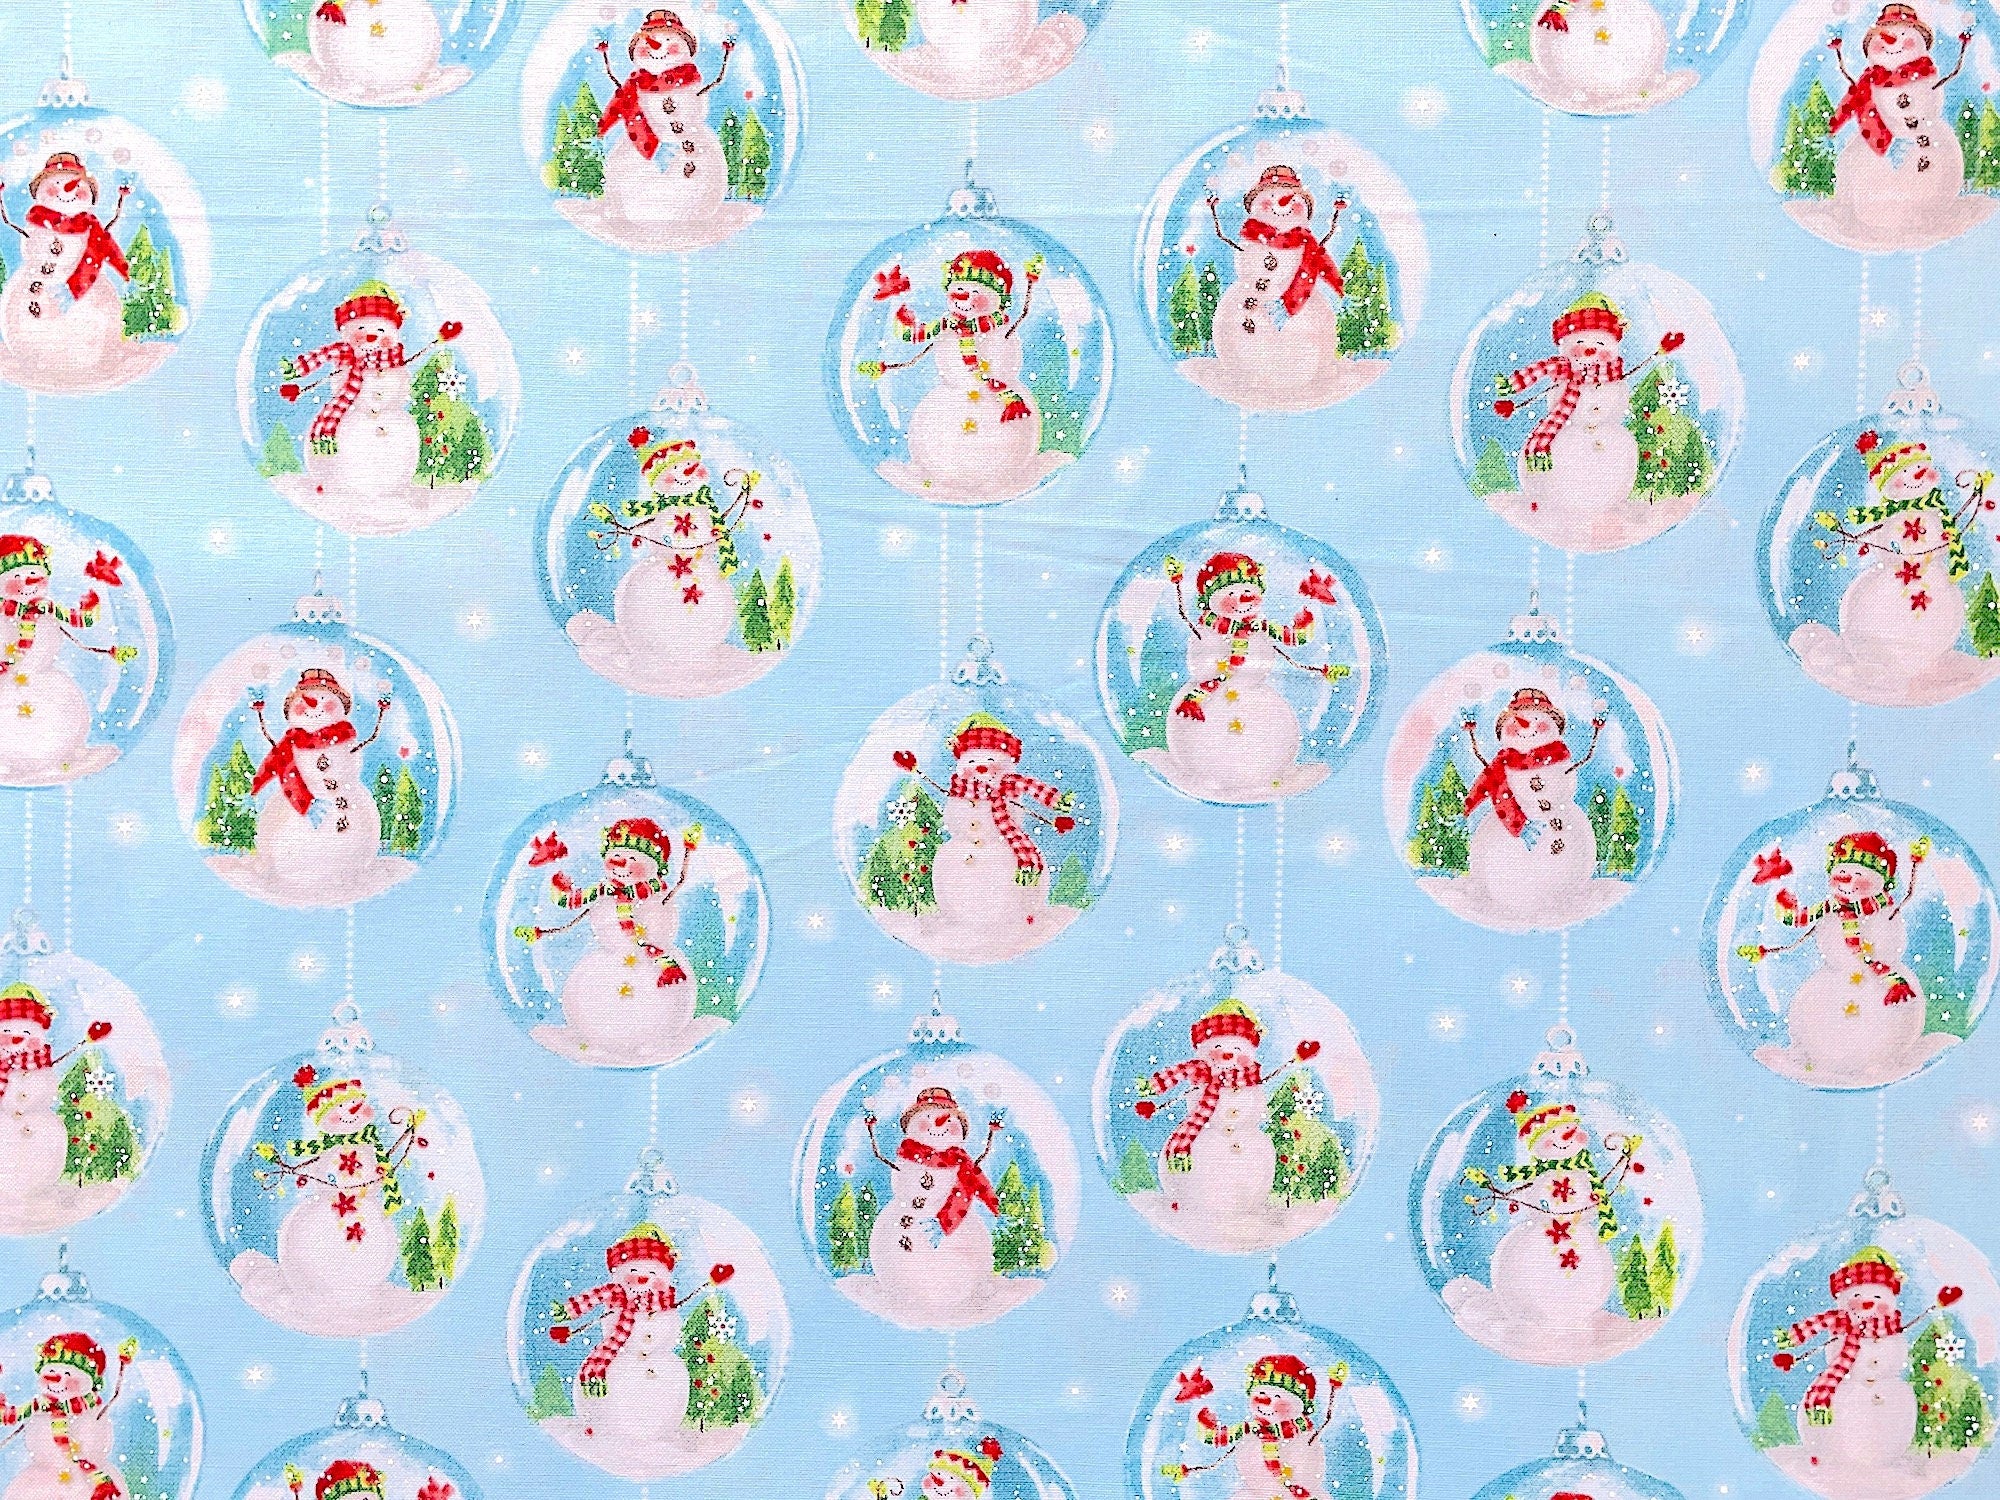 This holiday fabric from Windham Fabrics is covered with Snow Globes with Cute Happy Snowmen and birds inside.